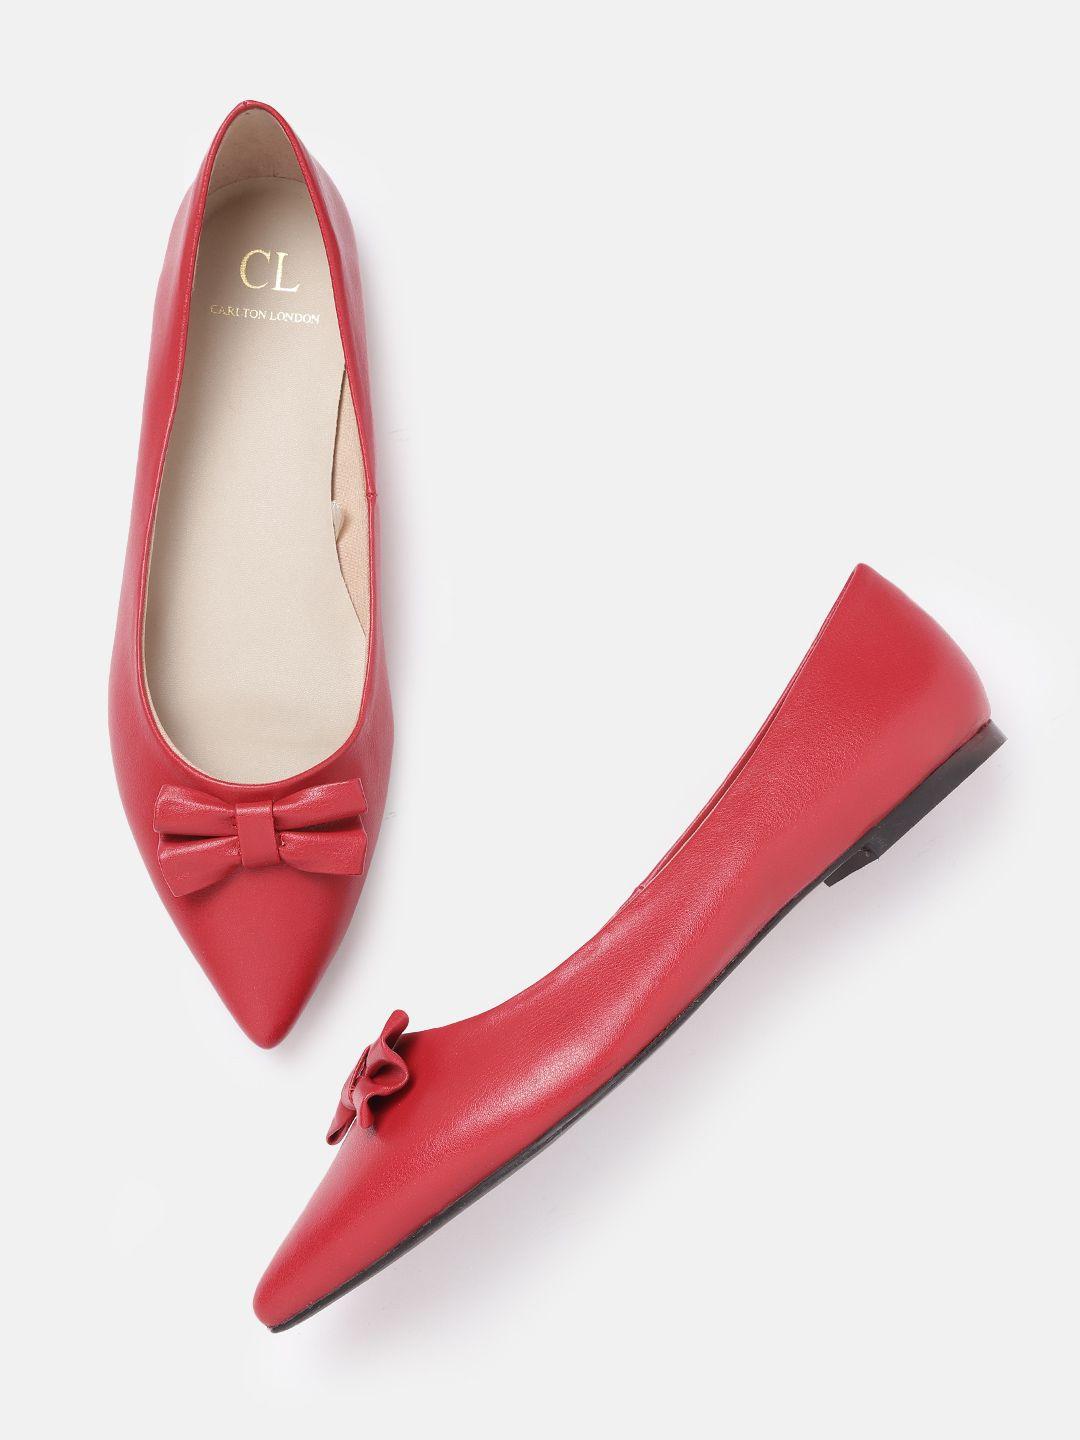 carlton-london-women-red-solid-ballerinas-flats-with-bows